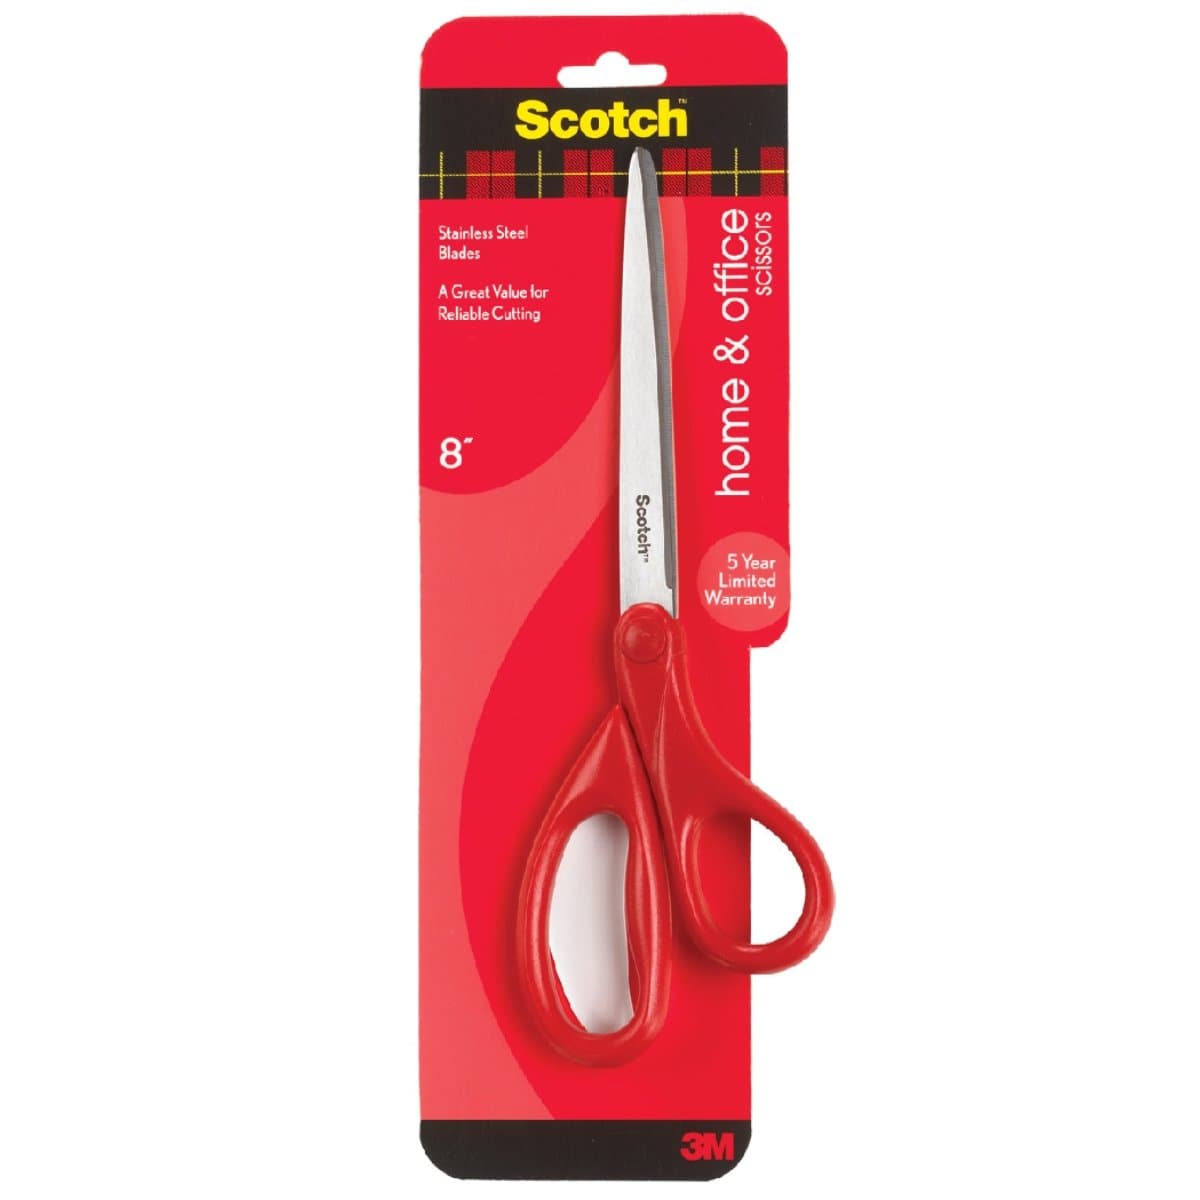 3M Scotch Home and Office Scissors 8 inches